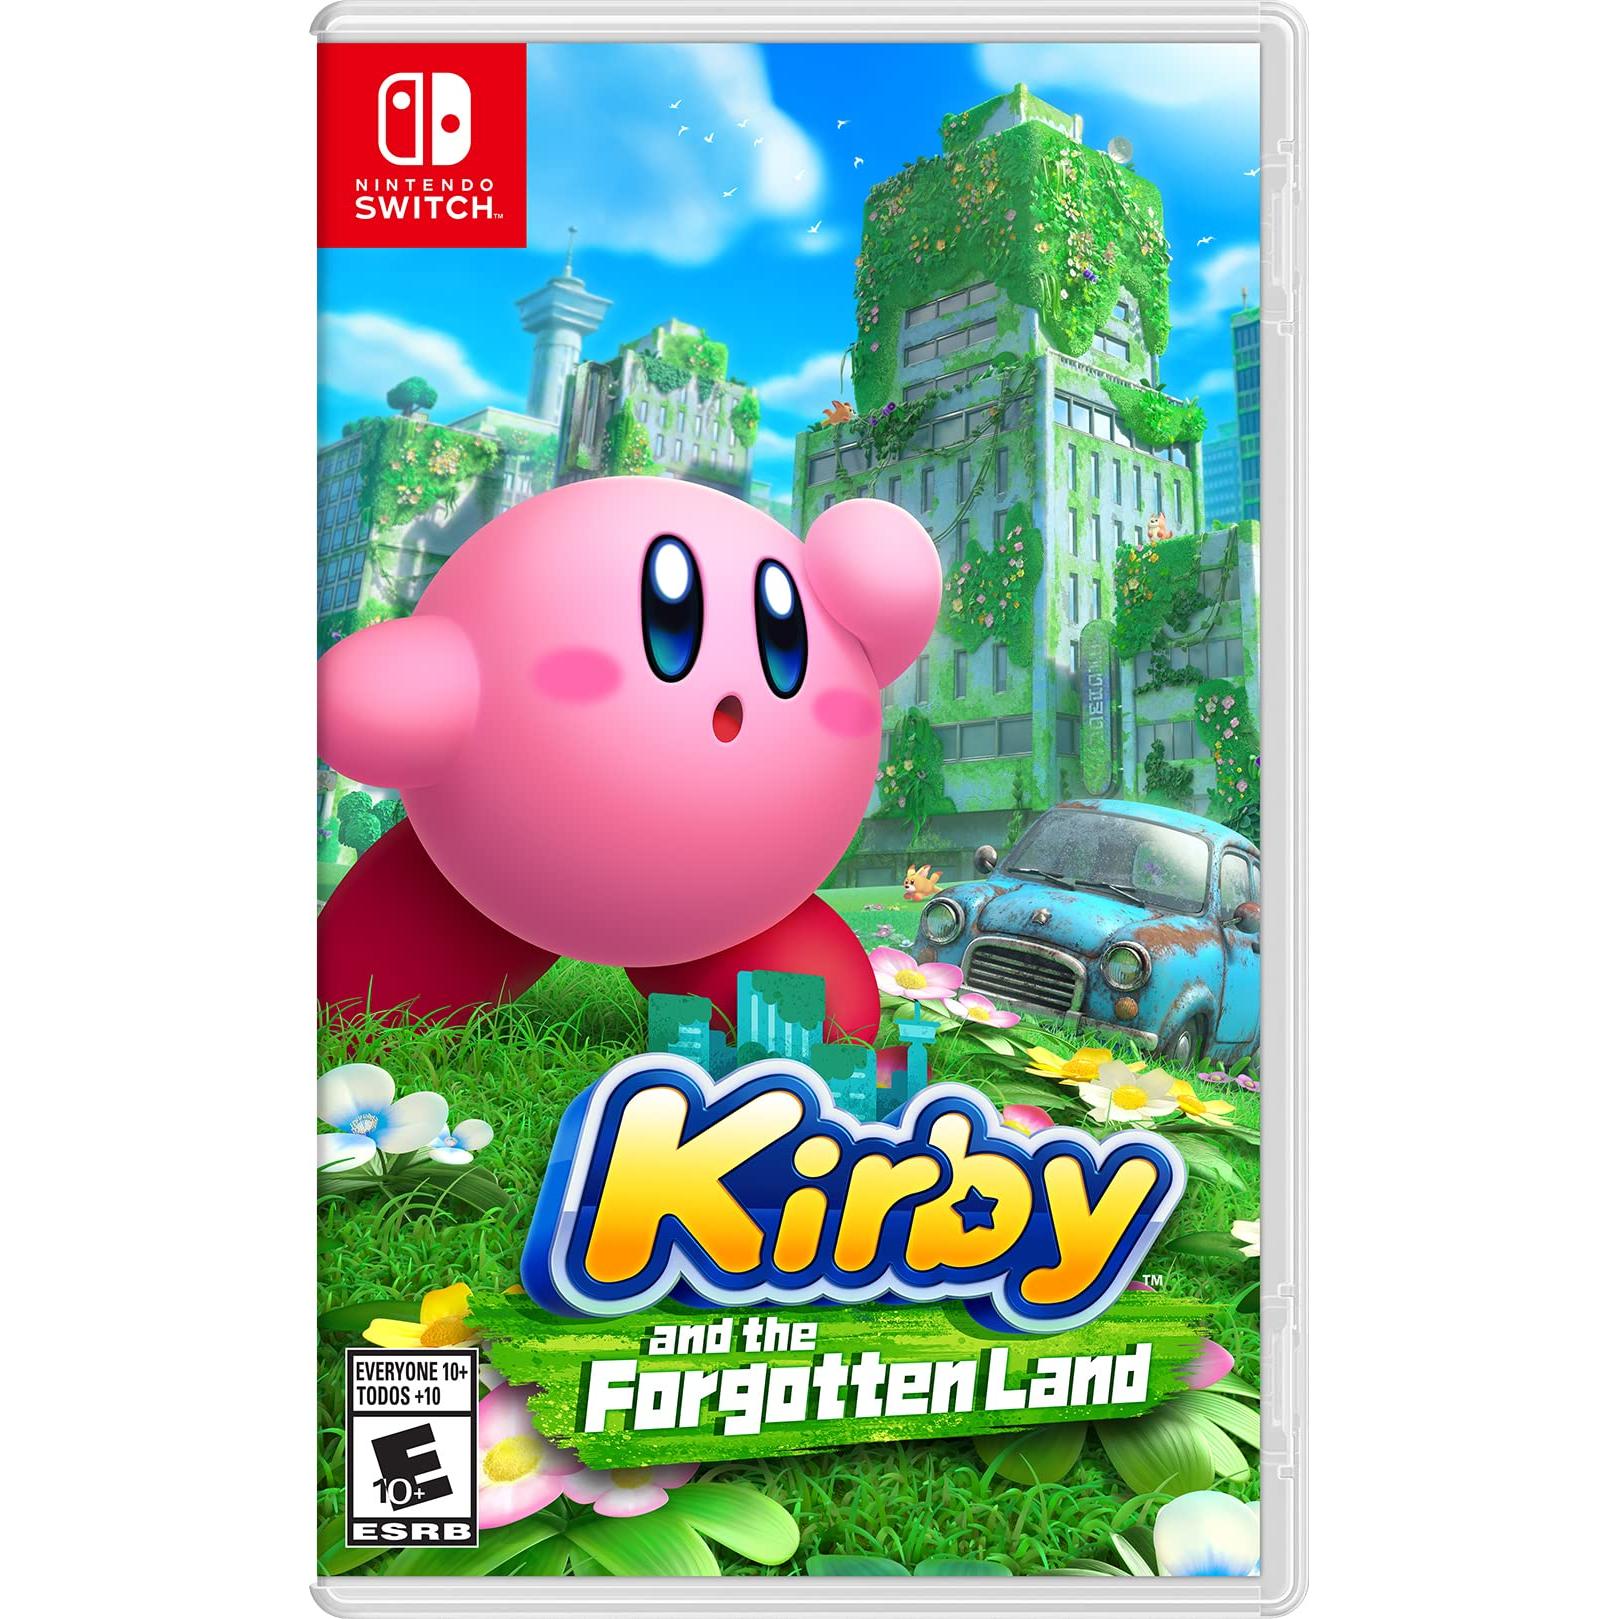 Nintendo - Kirby and the Forgotten Land